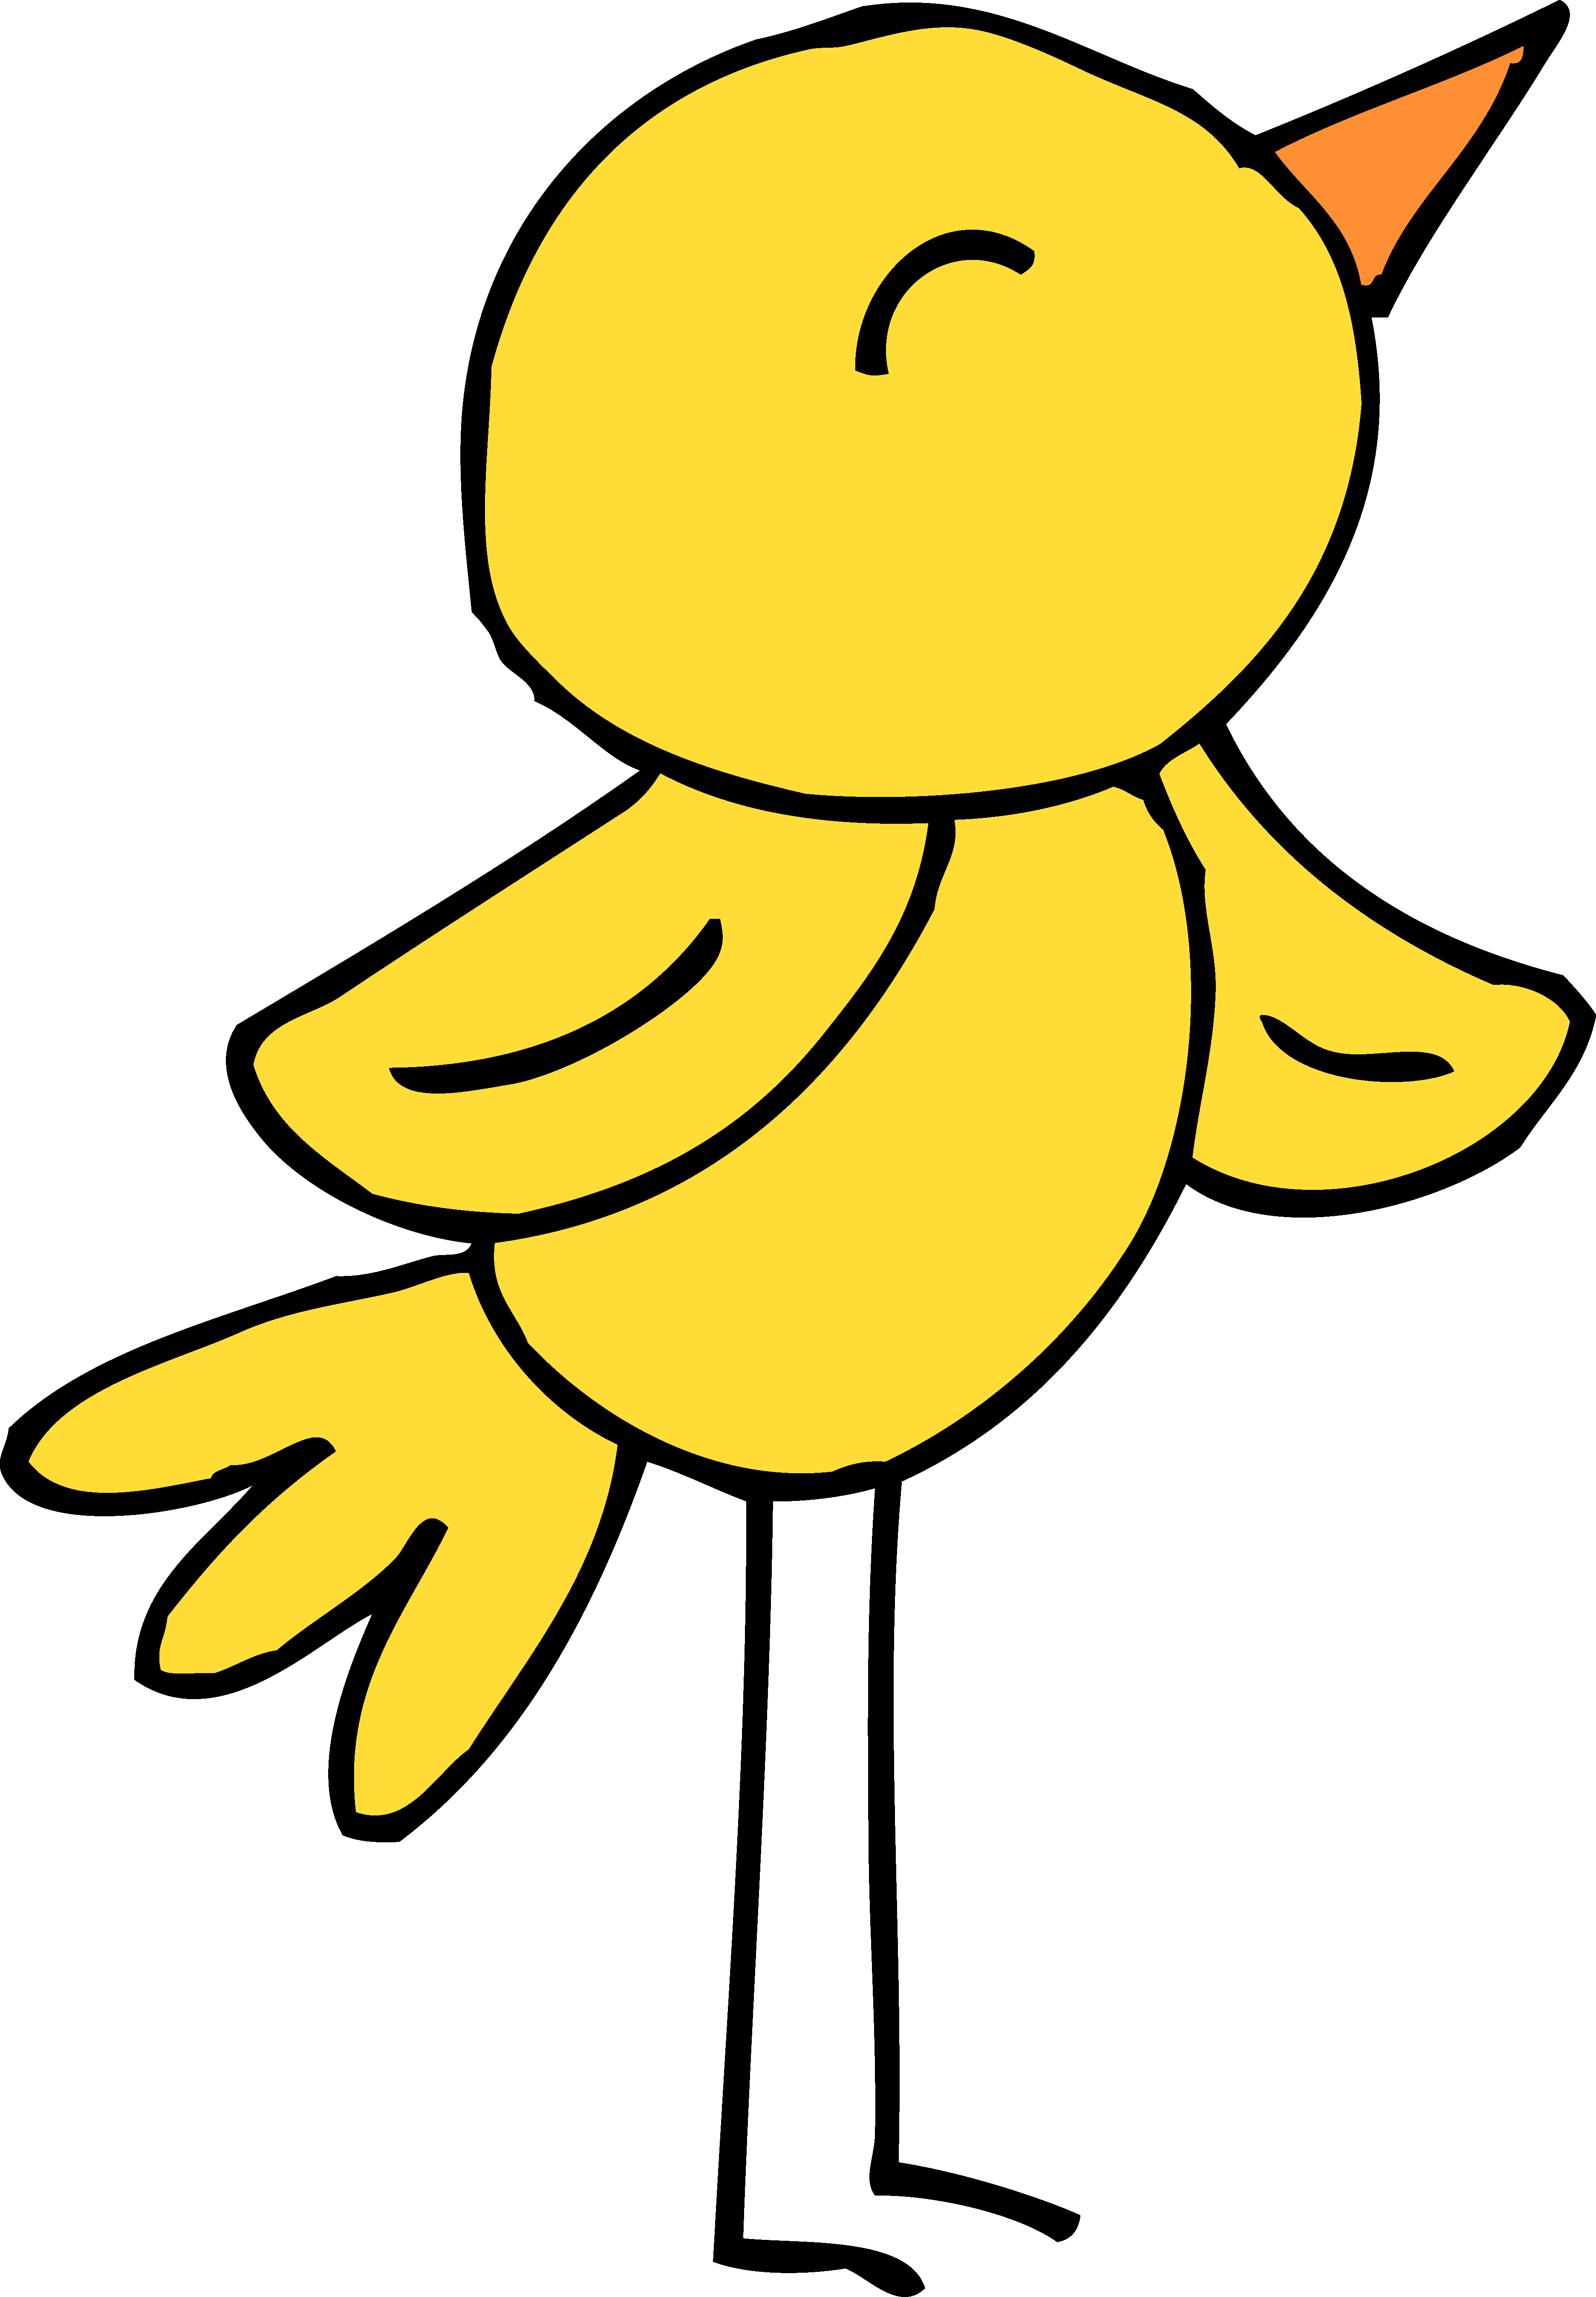 Canary clipart #1, Download drawings